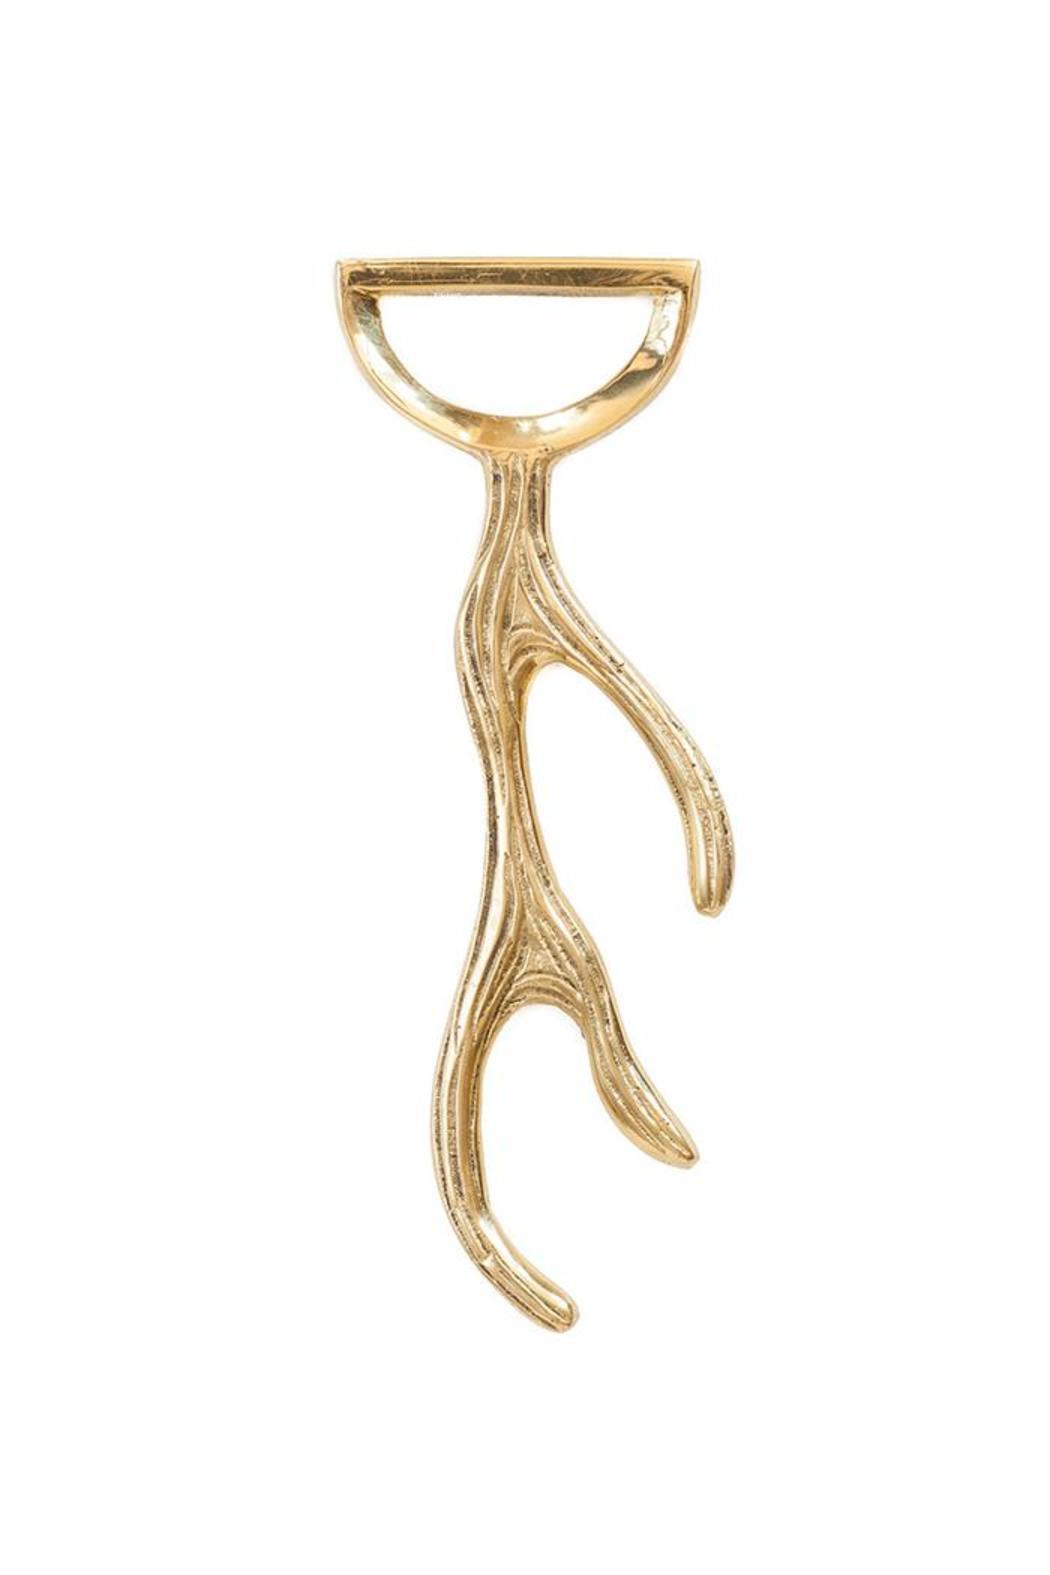 Antler Brass Bottle Opener | Decorating Your Thanksgiving Table | Apartment Decorating